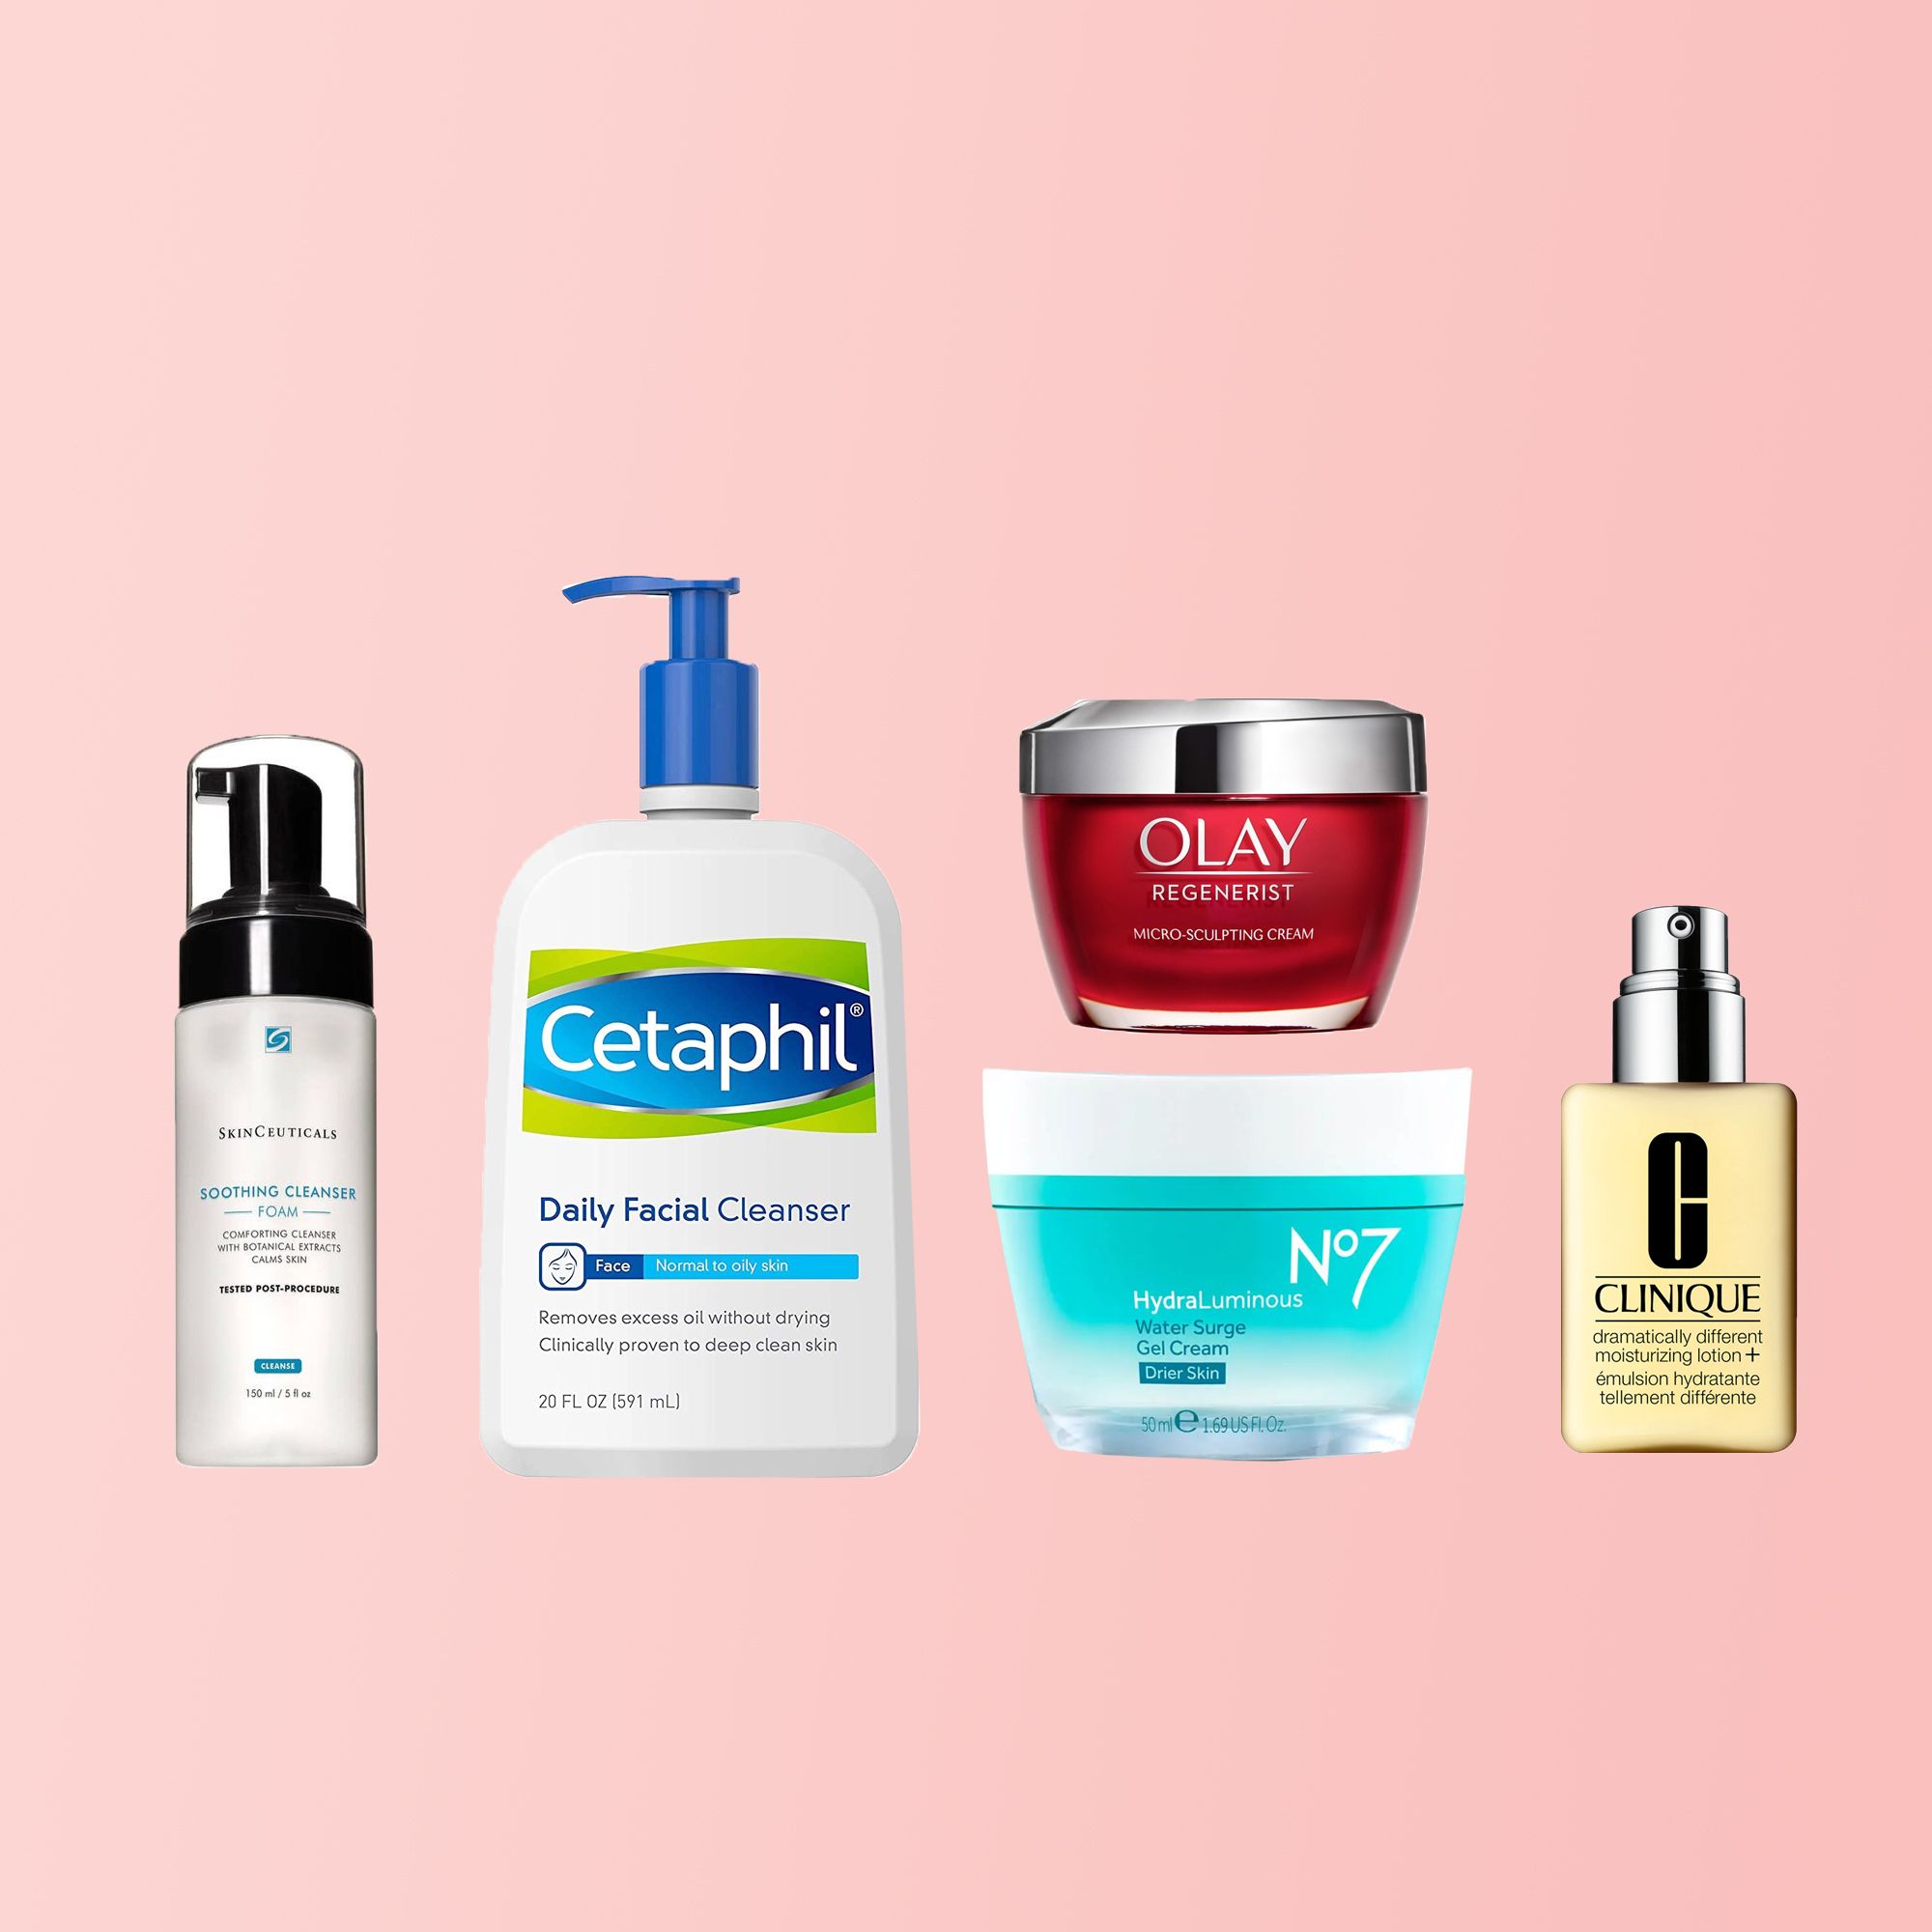 Build Your Skincare Routine With Our Favorite, Top-Tested Products (Ever!)